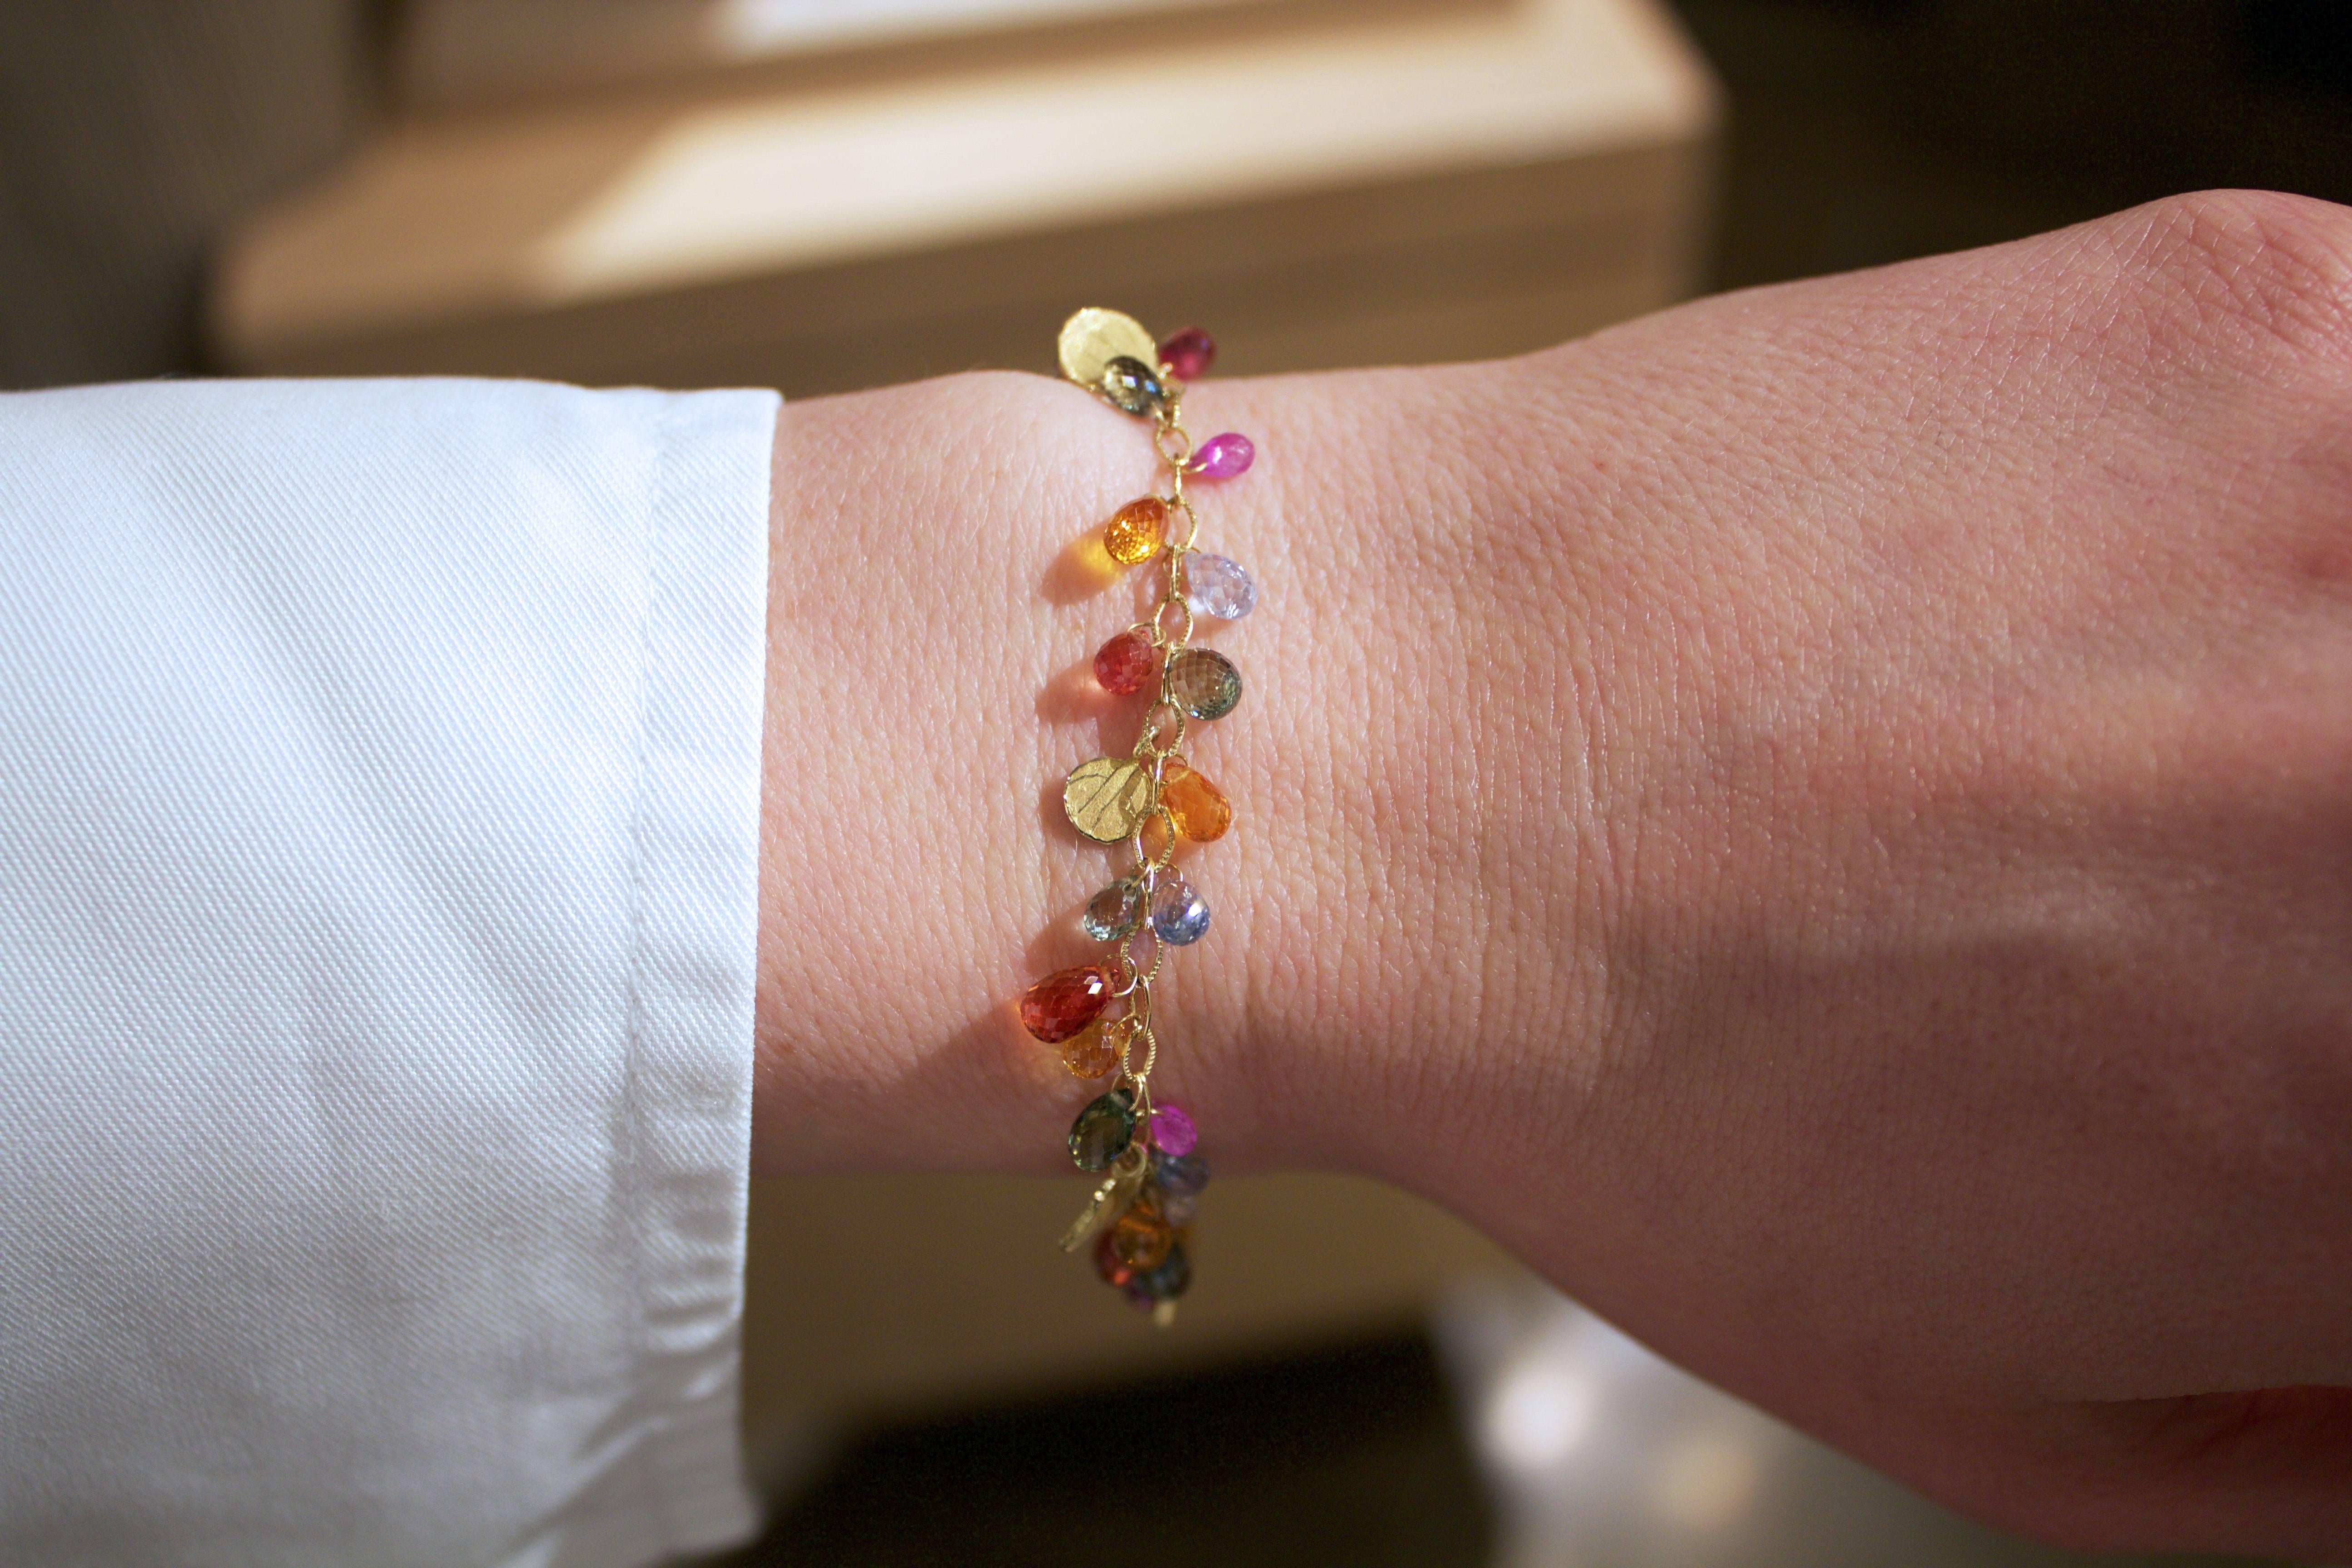 Petal Drop Bracelet handcrafted by award-winning jewelry artist Barbara Heinrich in matte-finished 18k yellow gold featuring an assortment of beautifully-faceted, vivid, multicolored sapphire briolettes accented with five signature petal spacers and